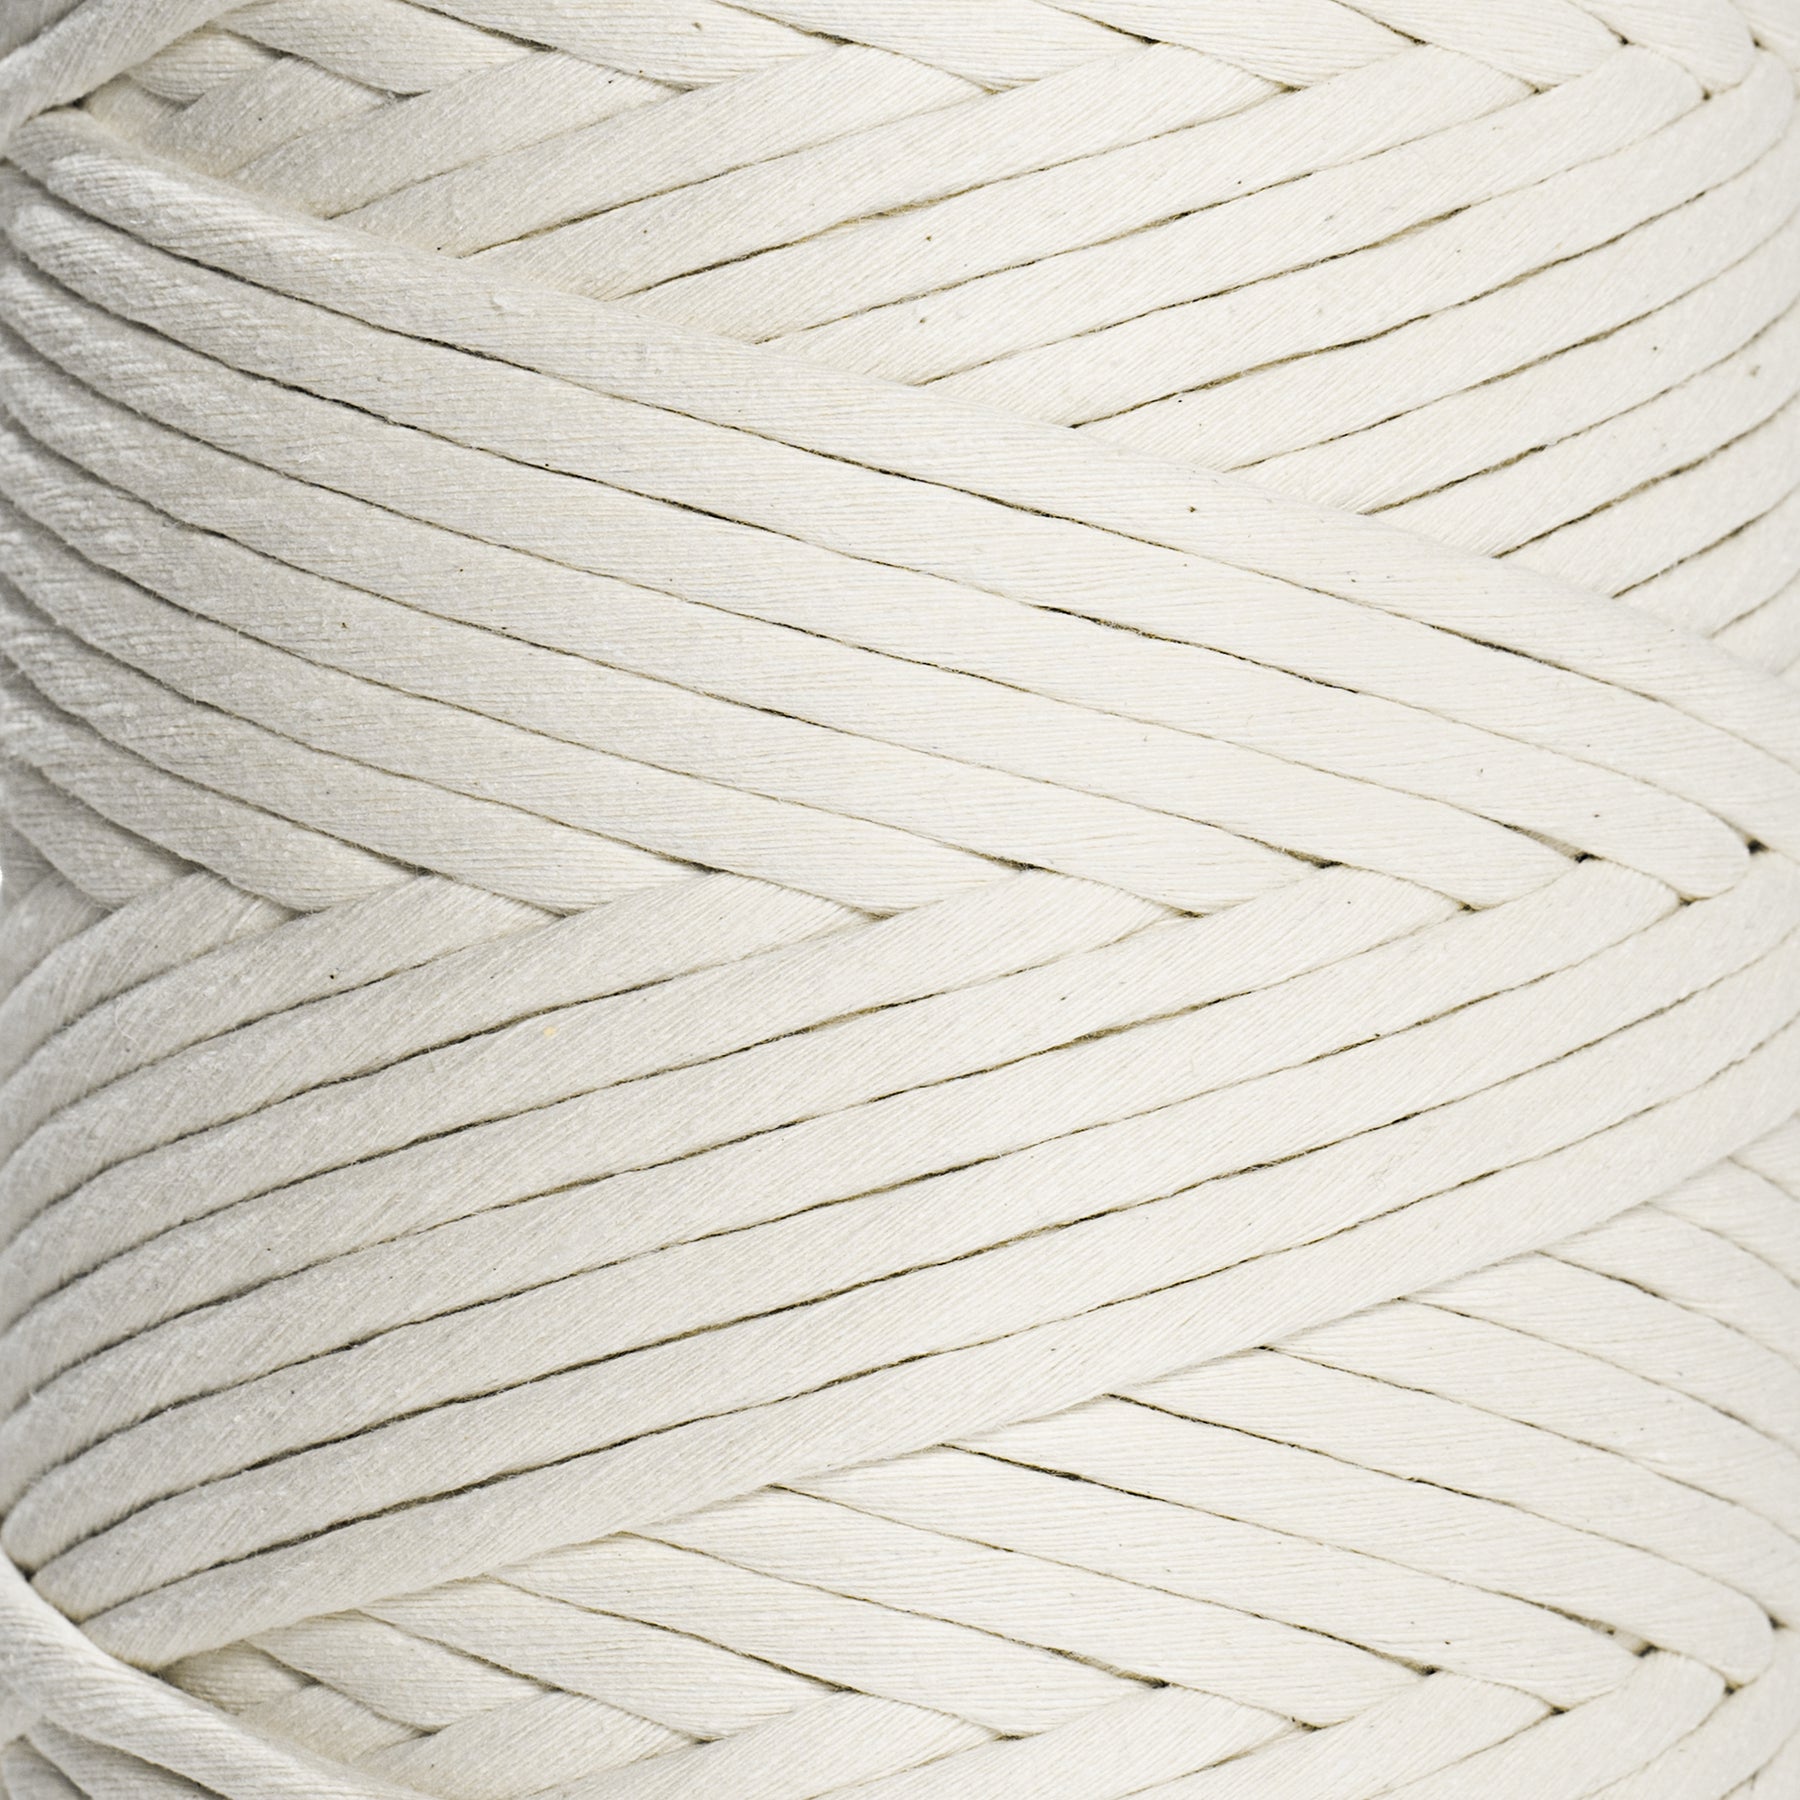 High-Strength and Durable 6mm Macrame Cord For Sale 